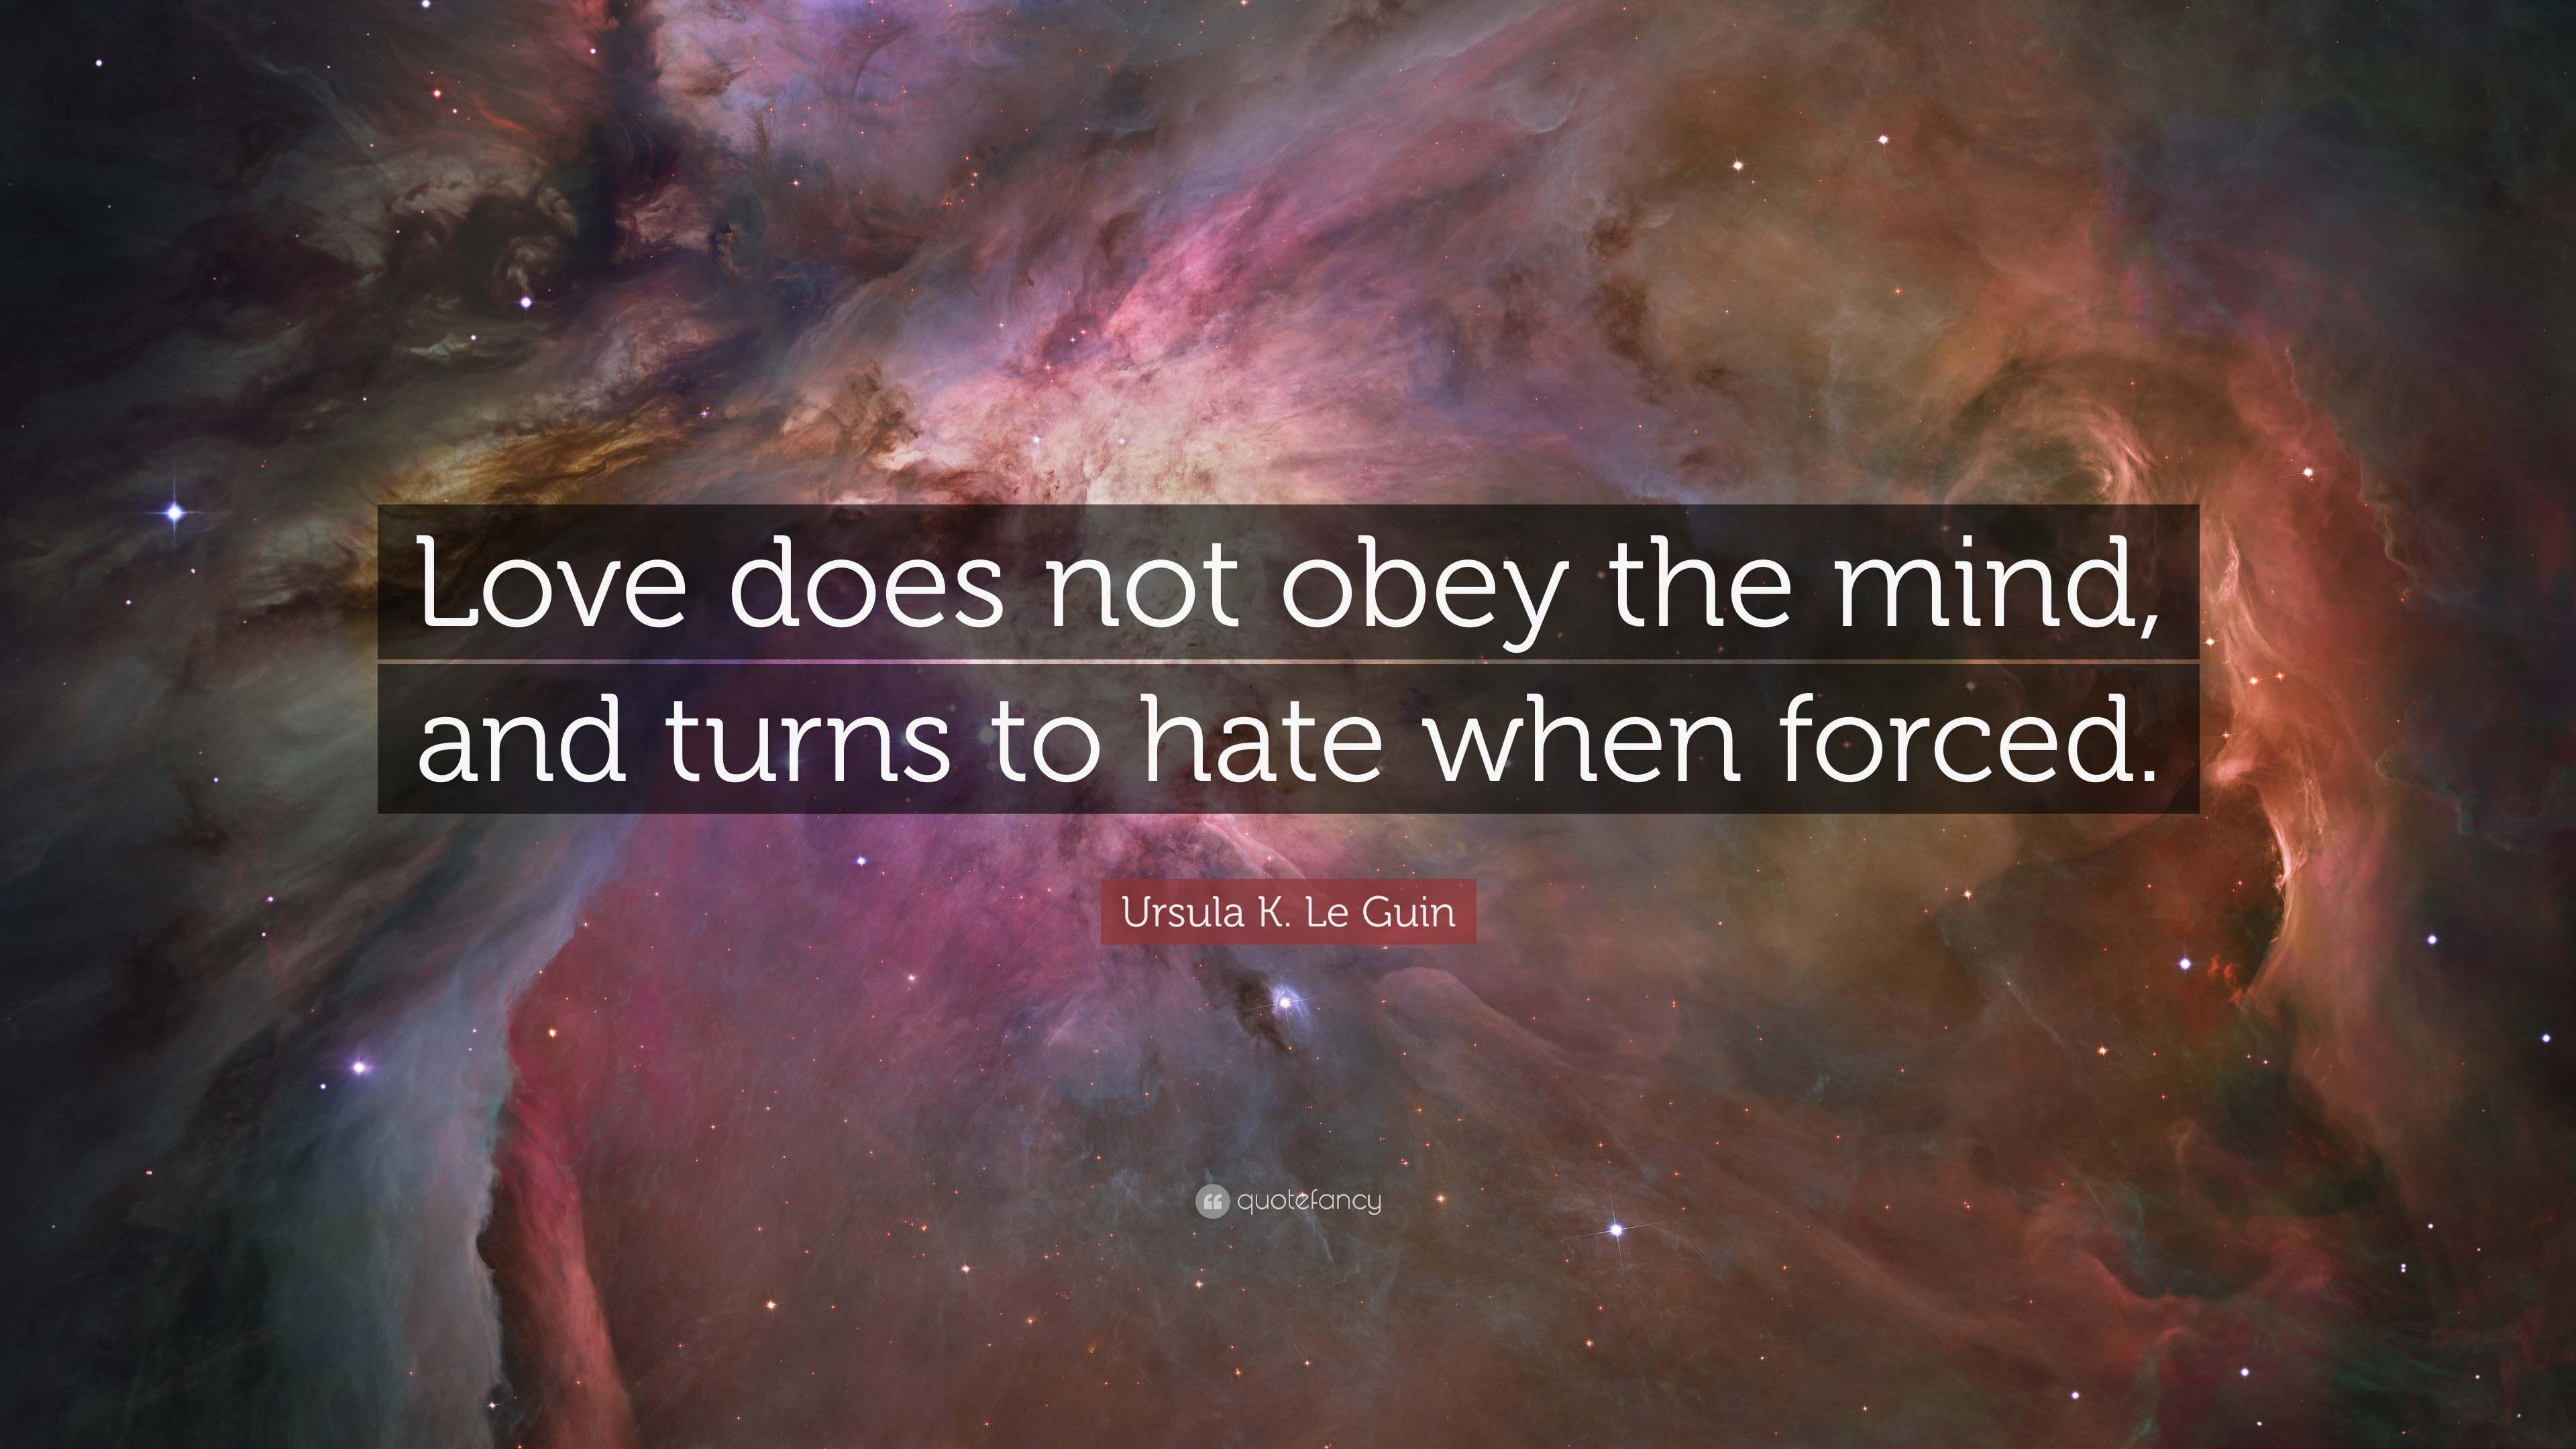 Ursula K Le Guin Quote “Love does not obey the mind and